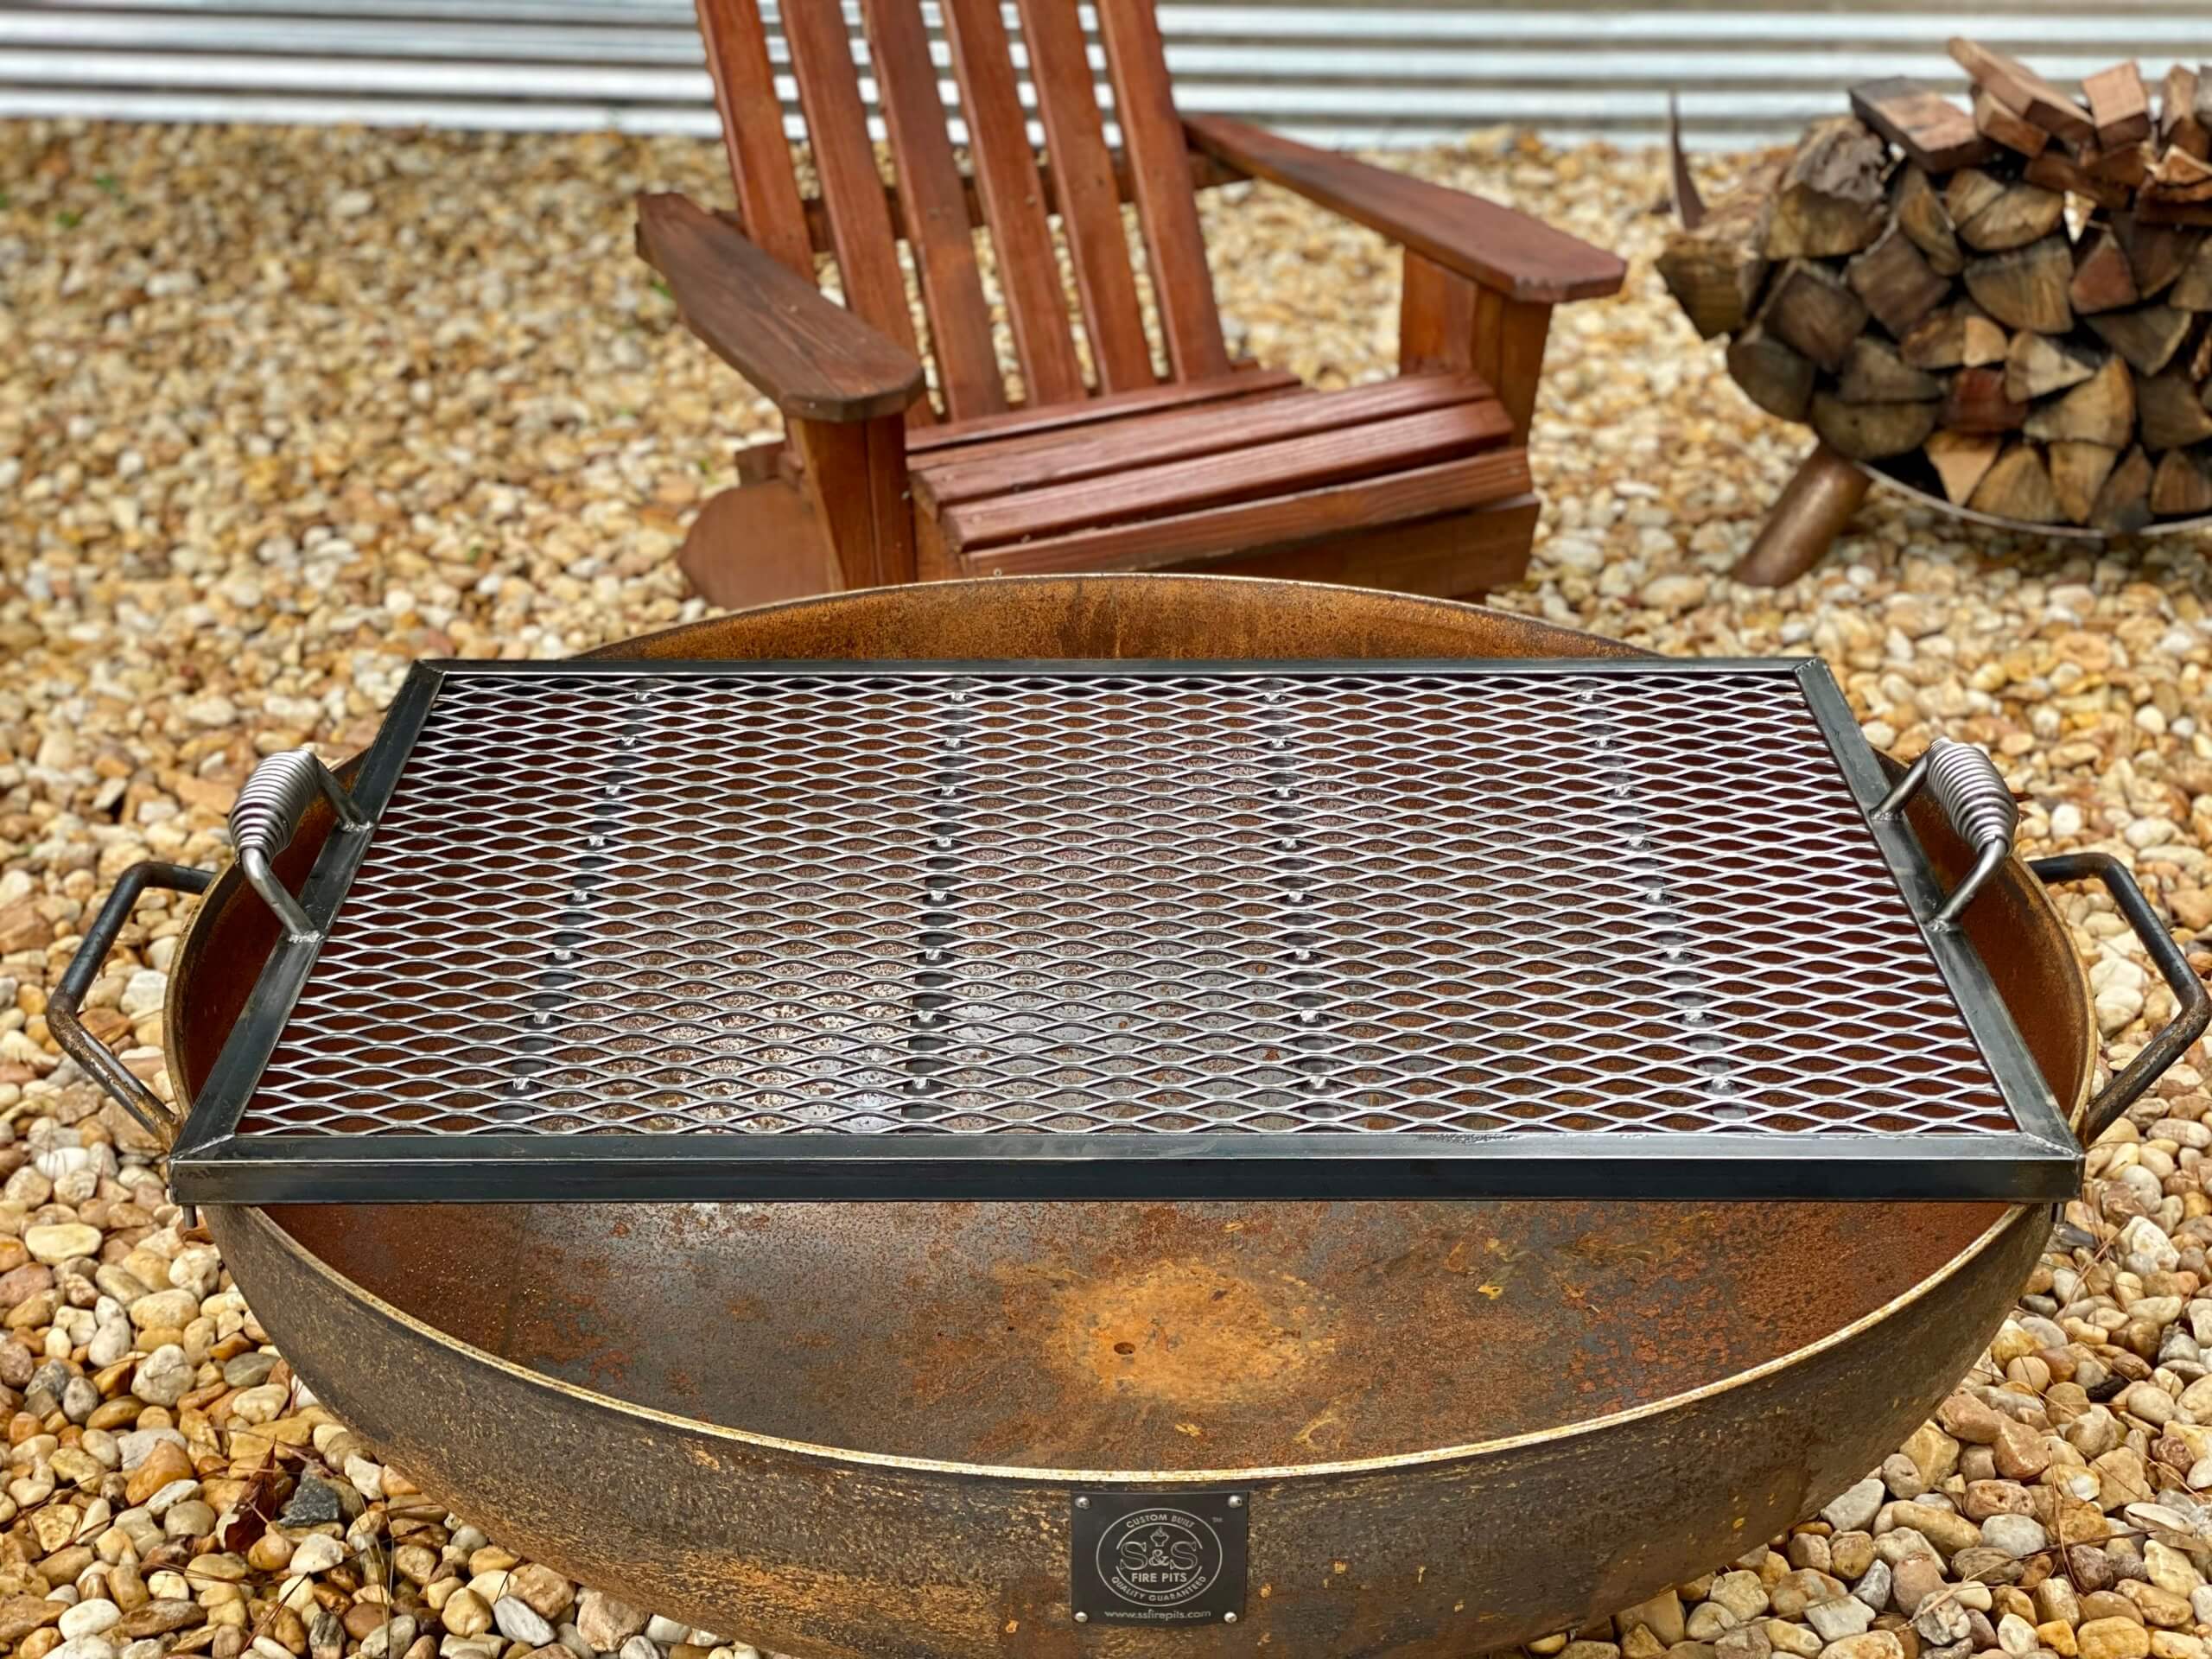 42 Heavy Duty Handcrafted Fire Pit, How To Make A Fire Pit Cooking Grate